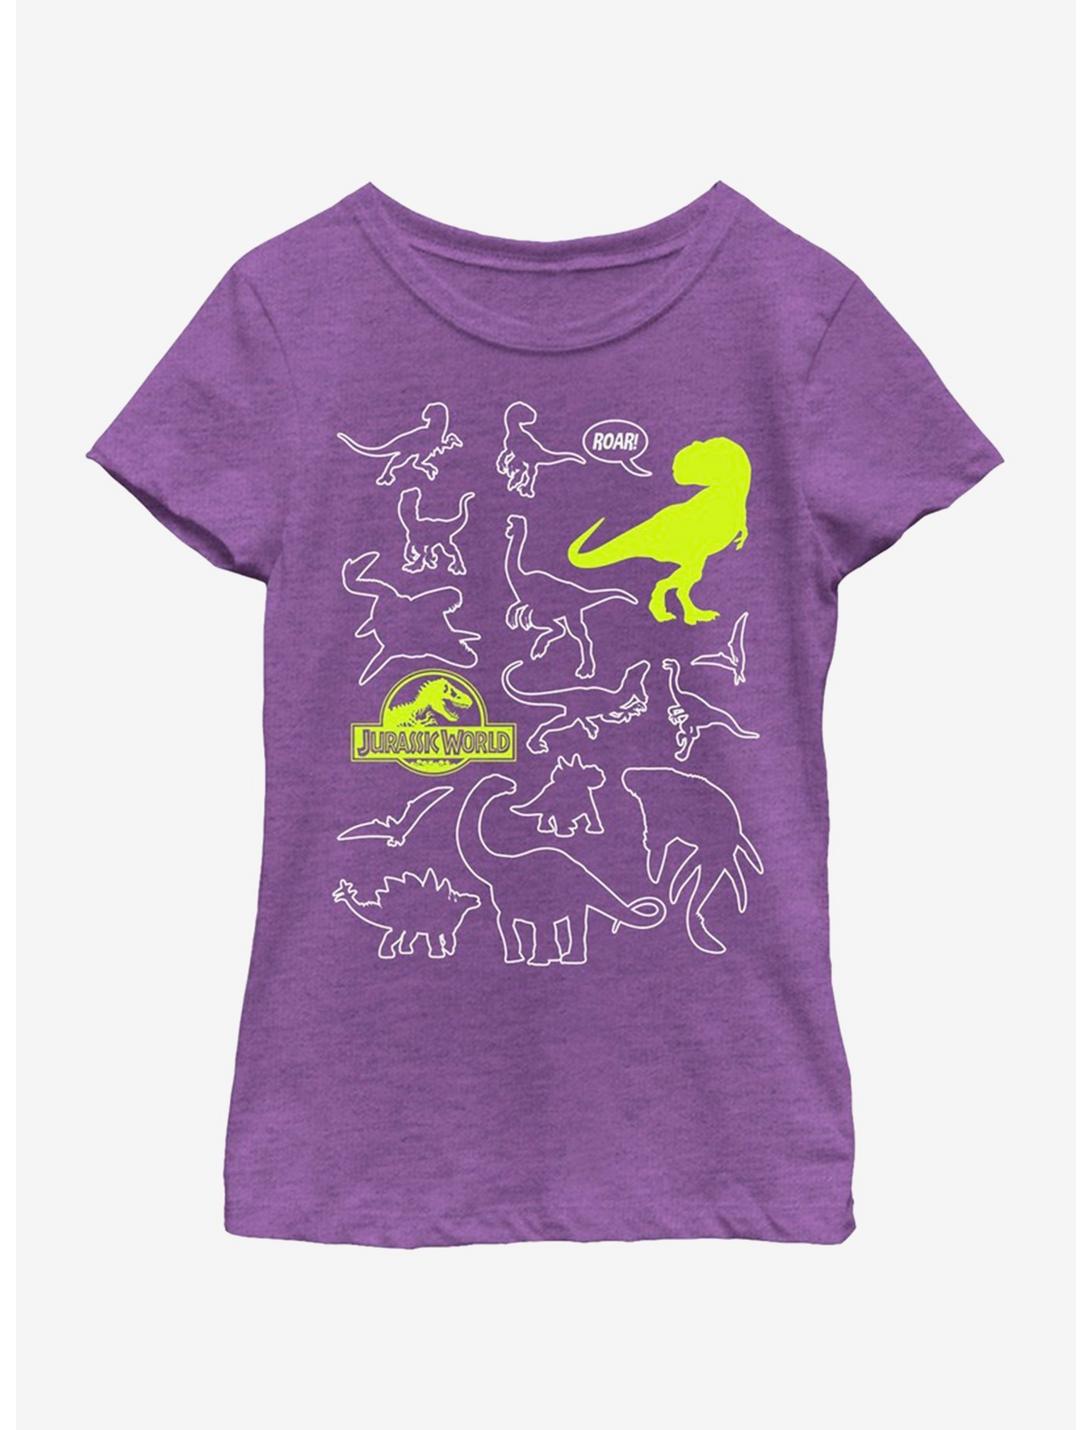 Jurassic Park Dino Doodle Youth Girls T-Shirt, PURPLE BERRY, hi-res